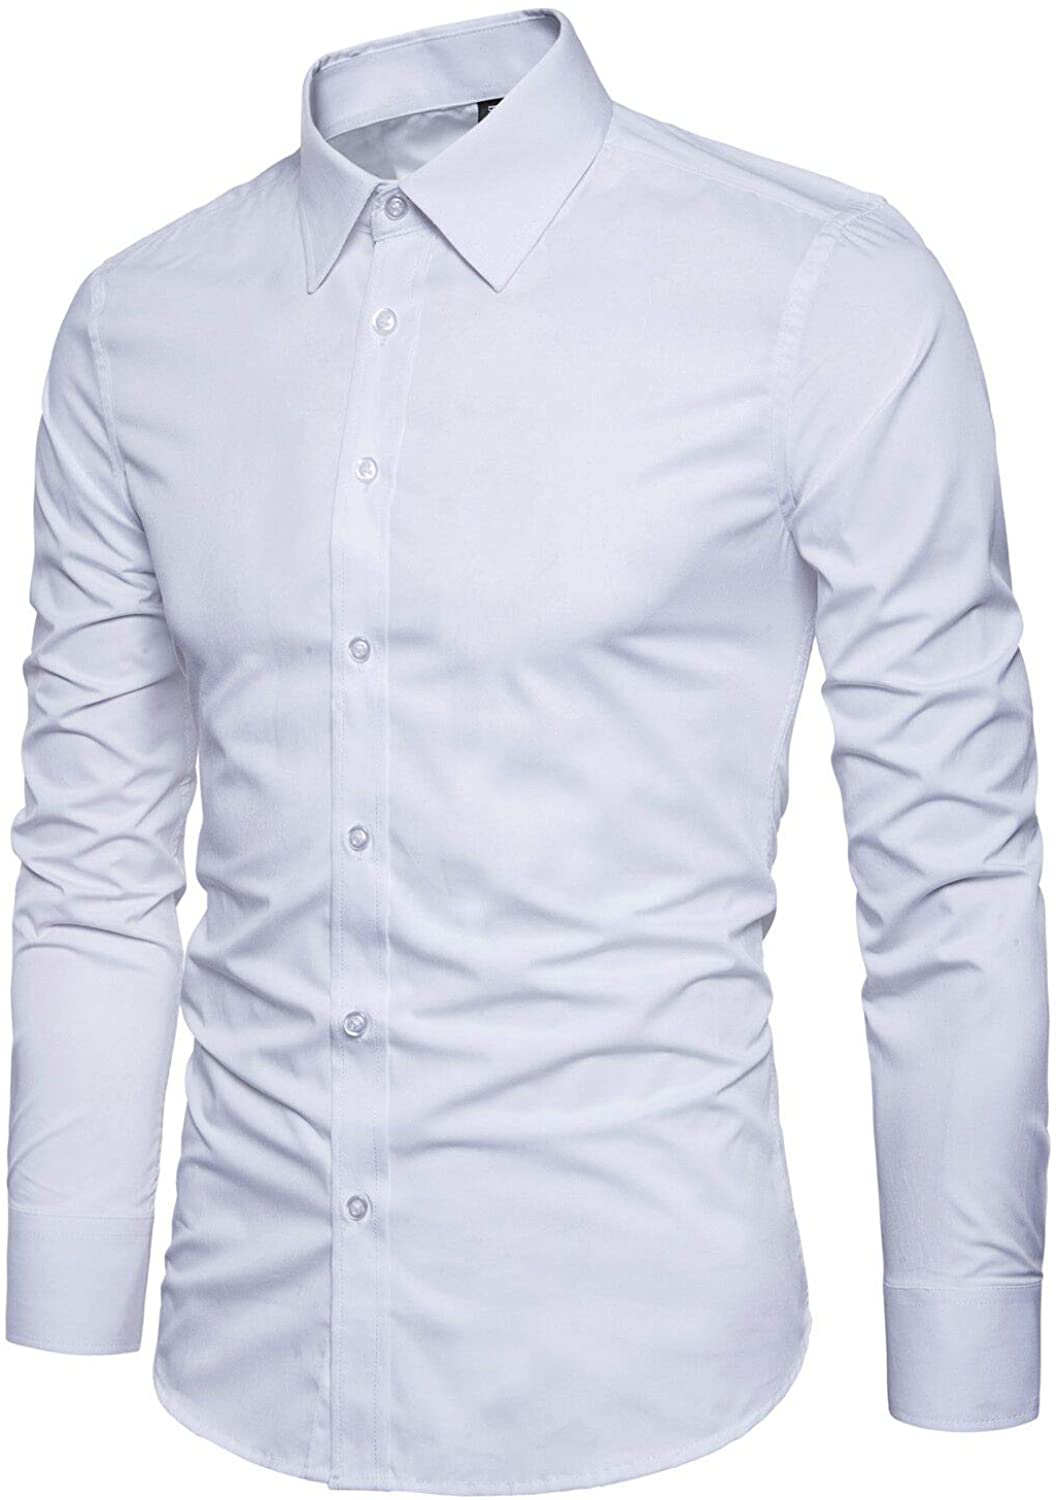 LOCALMODE Men's Slim Fit Cotton Business Shirt Solid Long Sleeve 